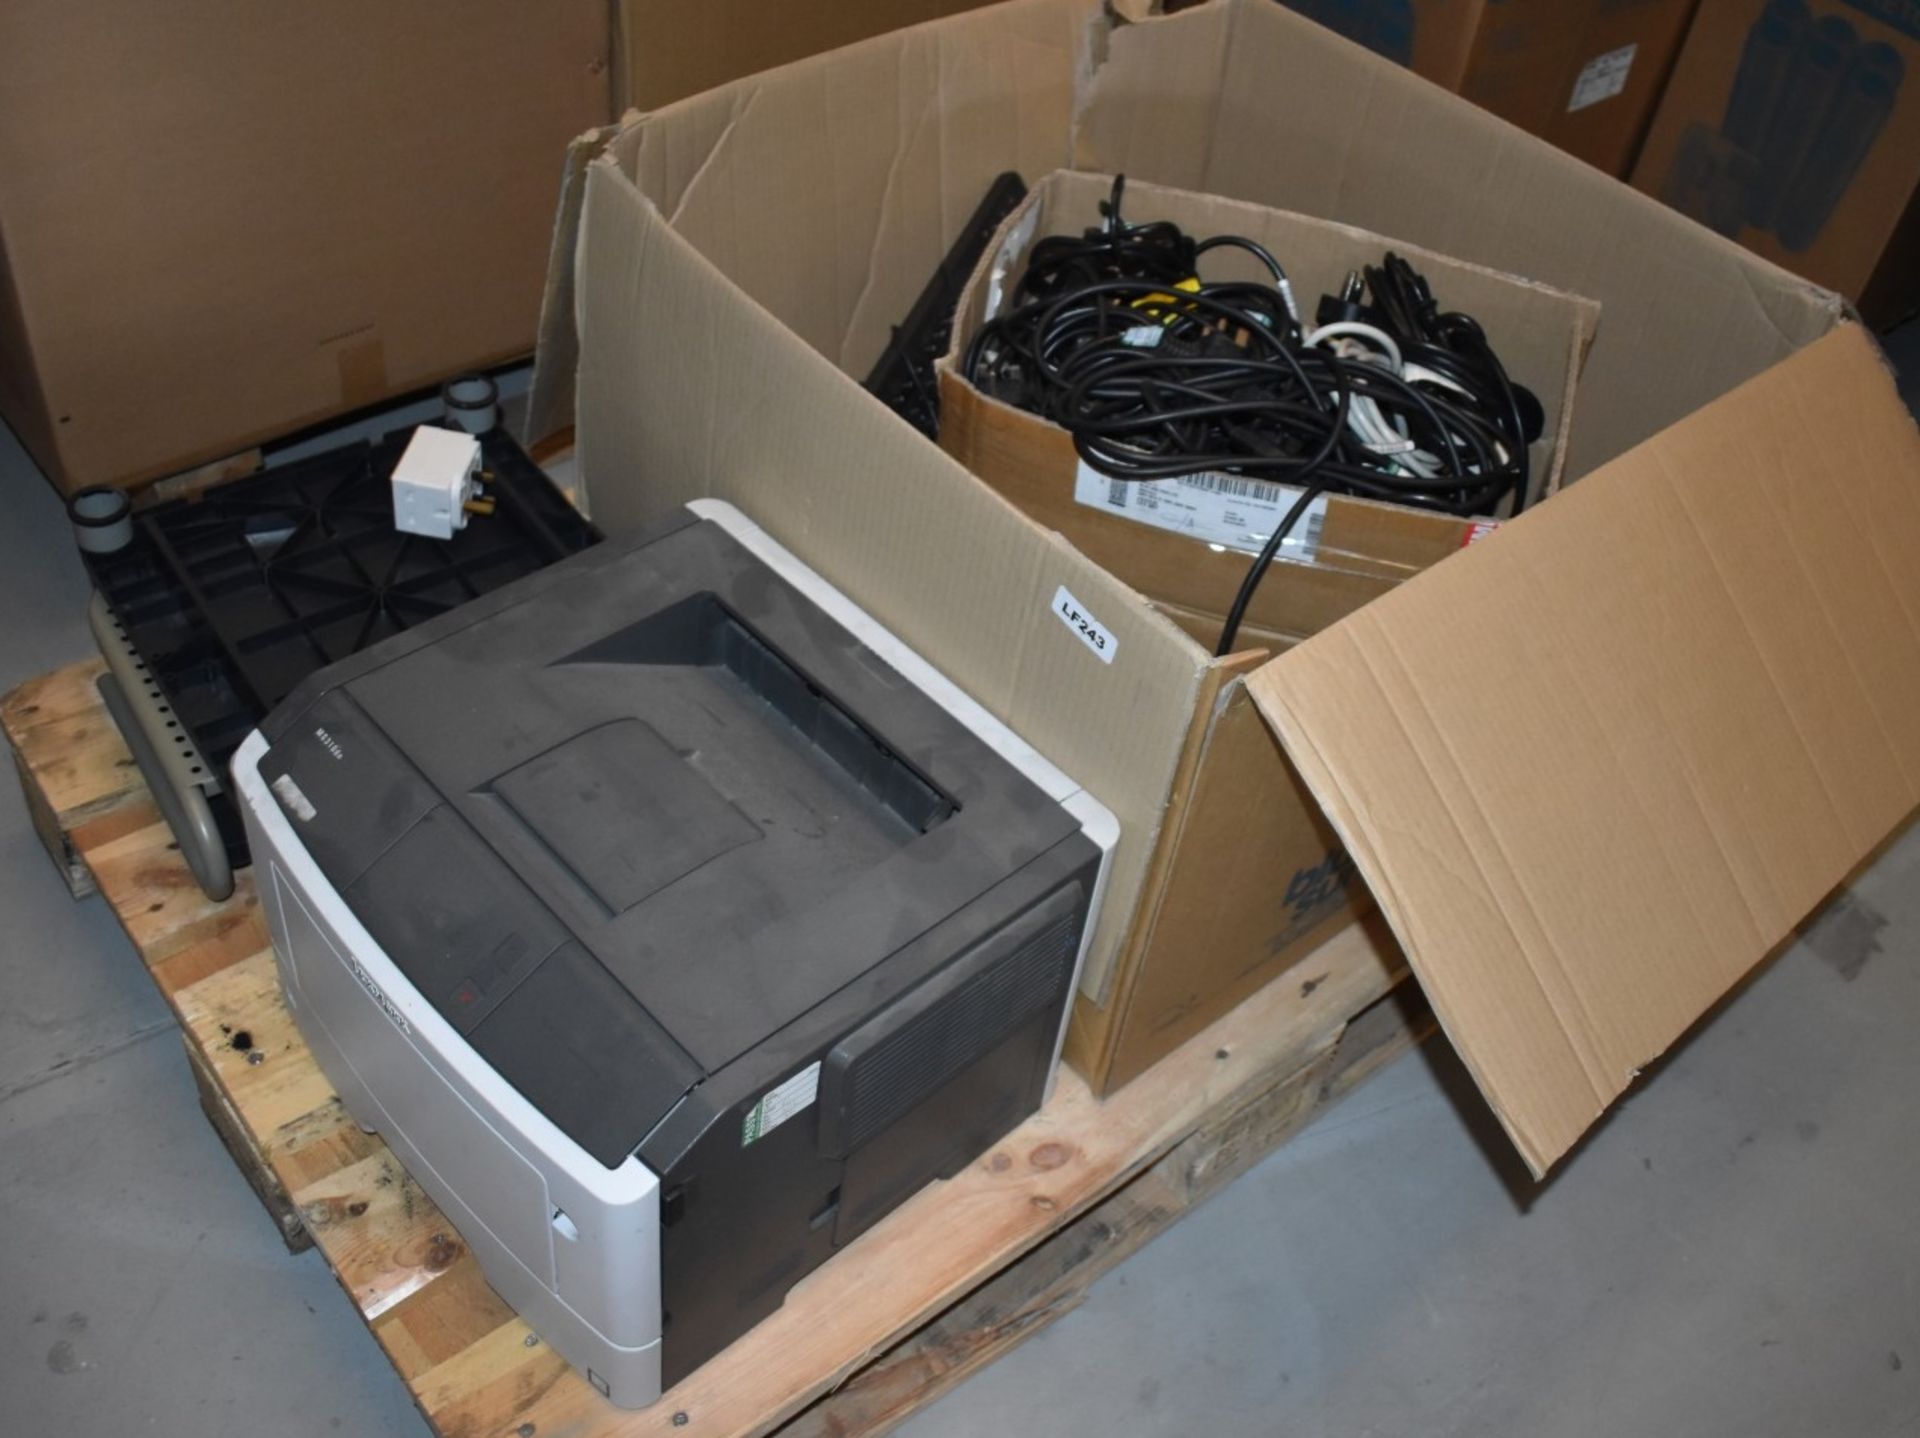 1 x Assorted Pallet Lot of Computer Equipment - Includes Laser Printer, Kettle Leads, And More!